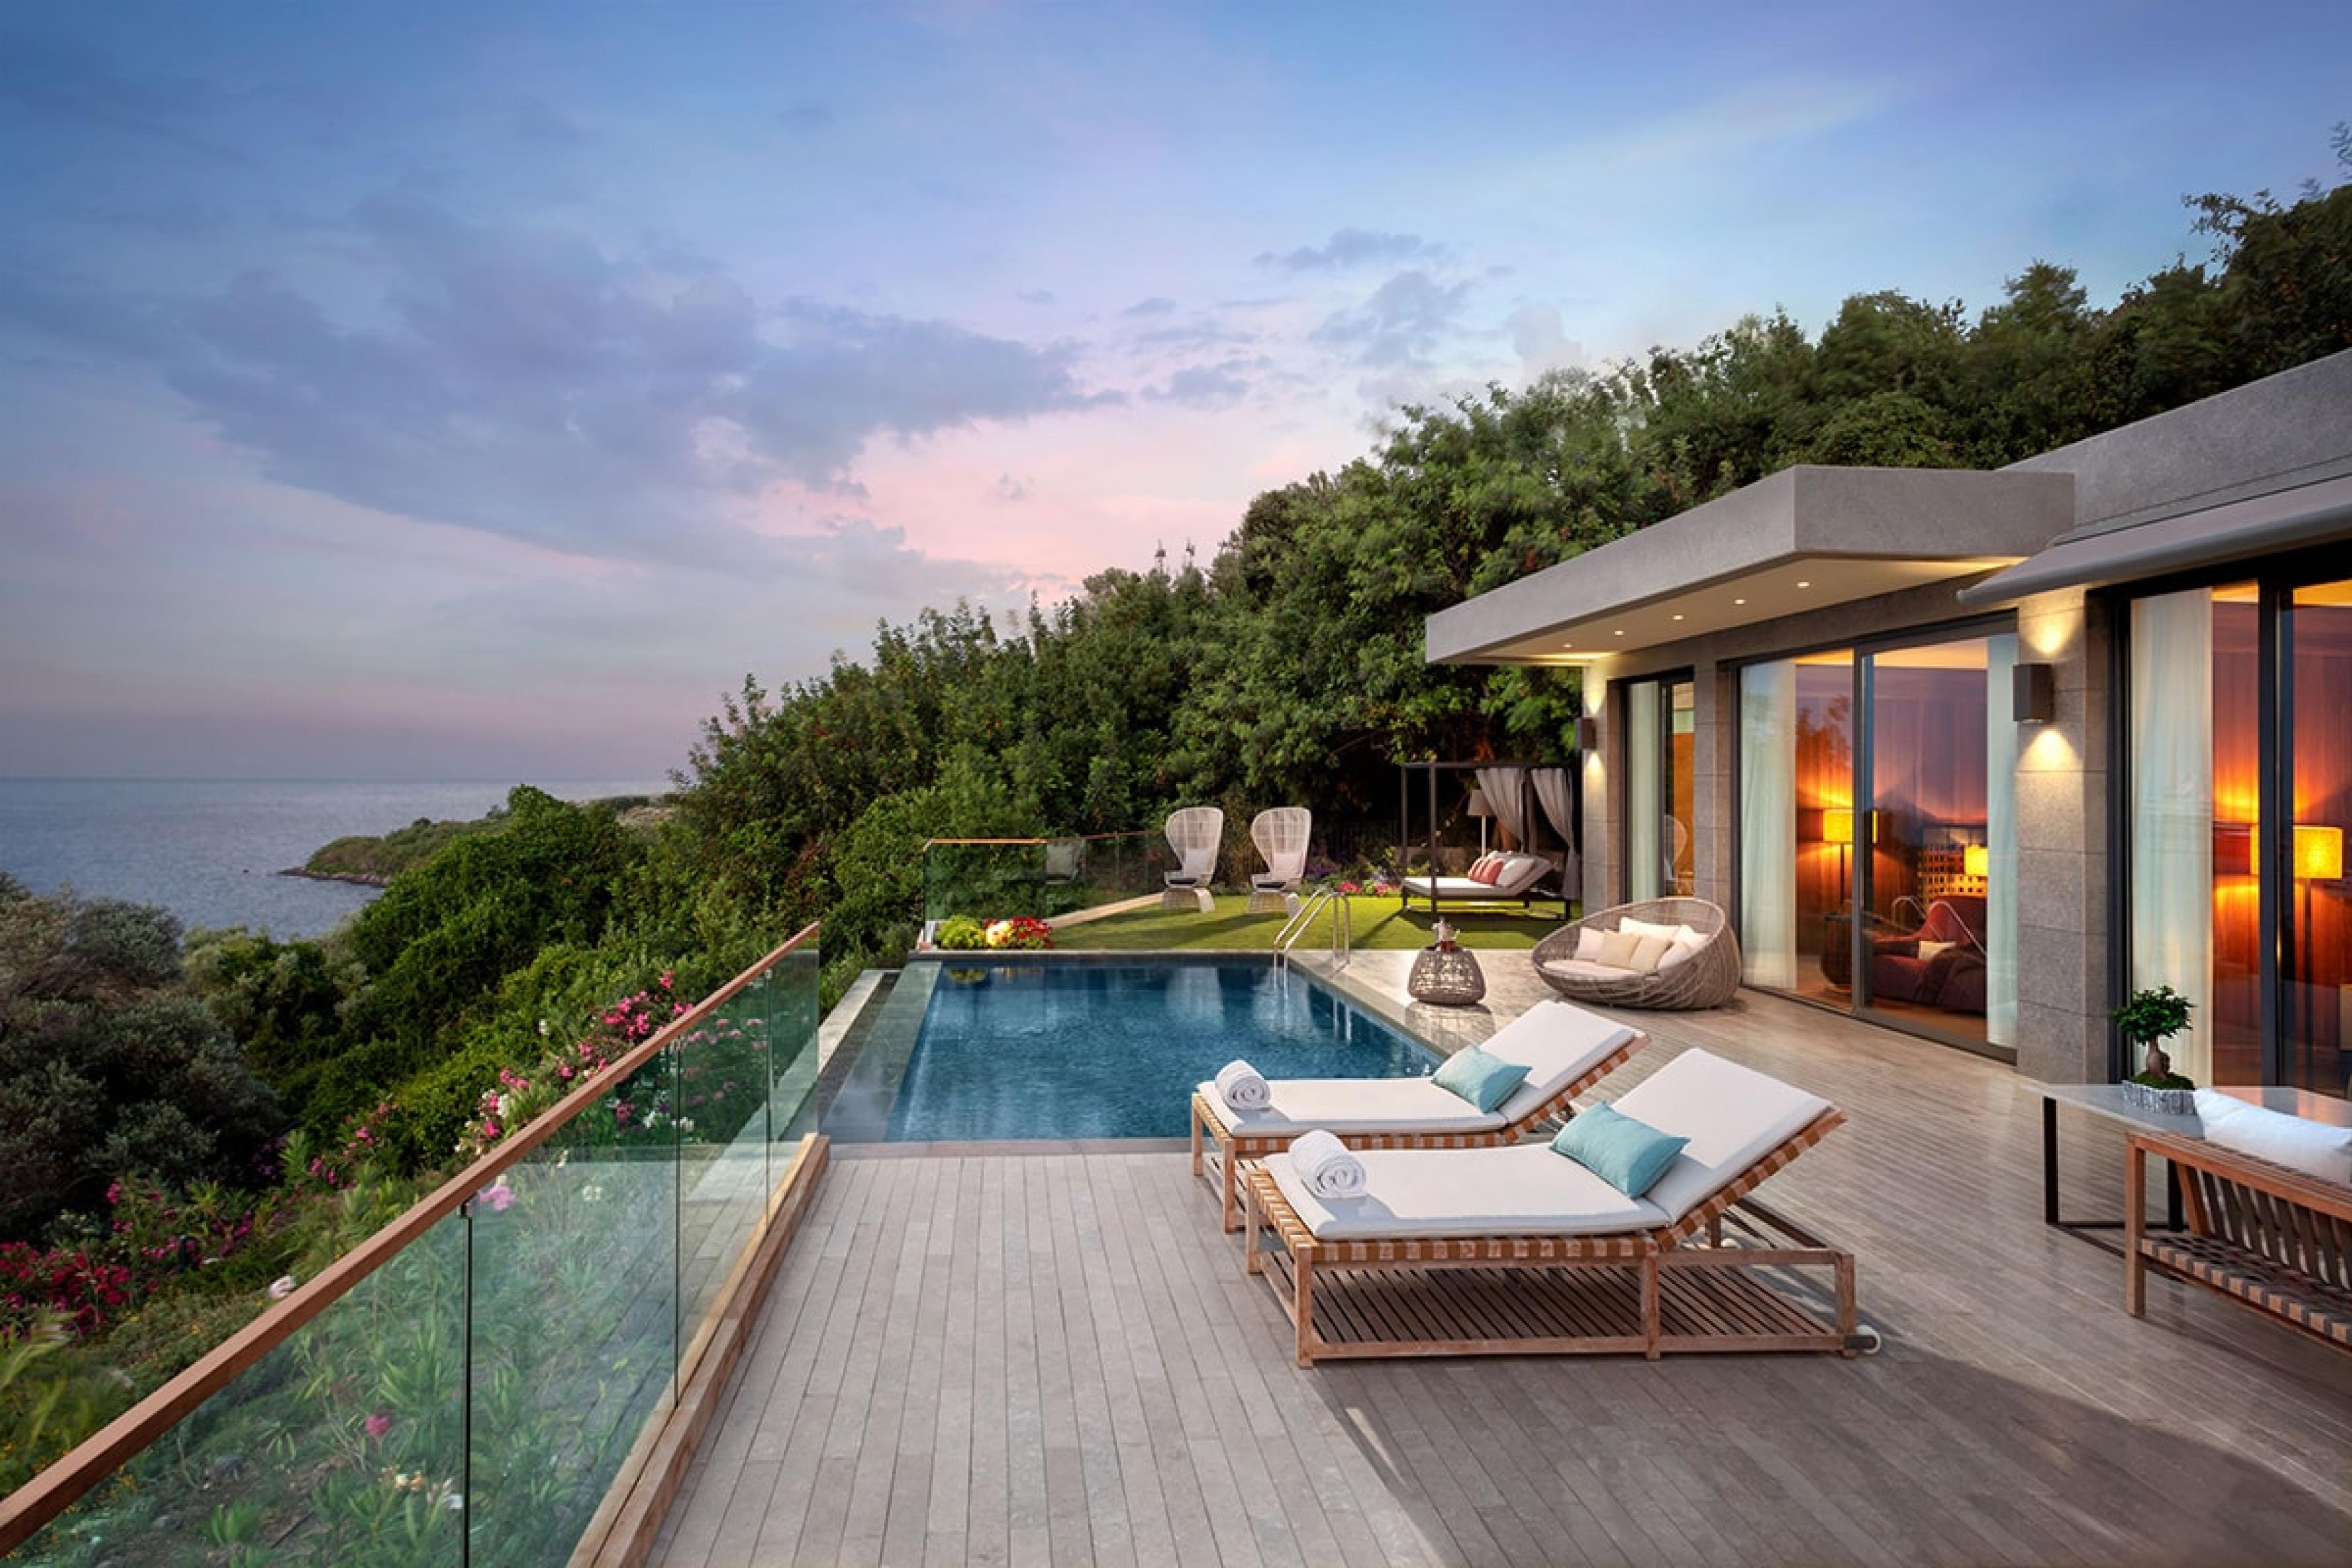 hotel suite terrace with private plunge pool and multiple lounge chairs looking out over hill at dusk